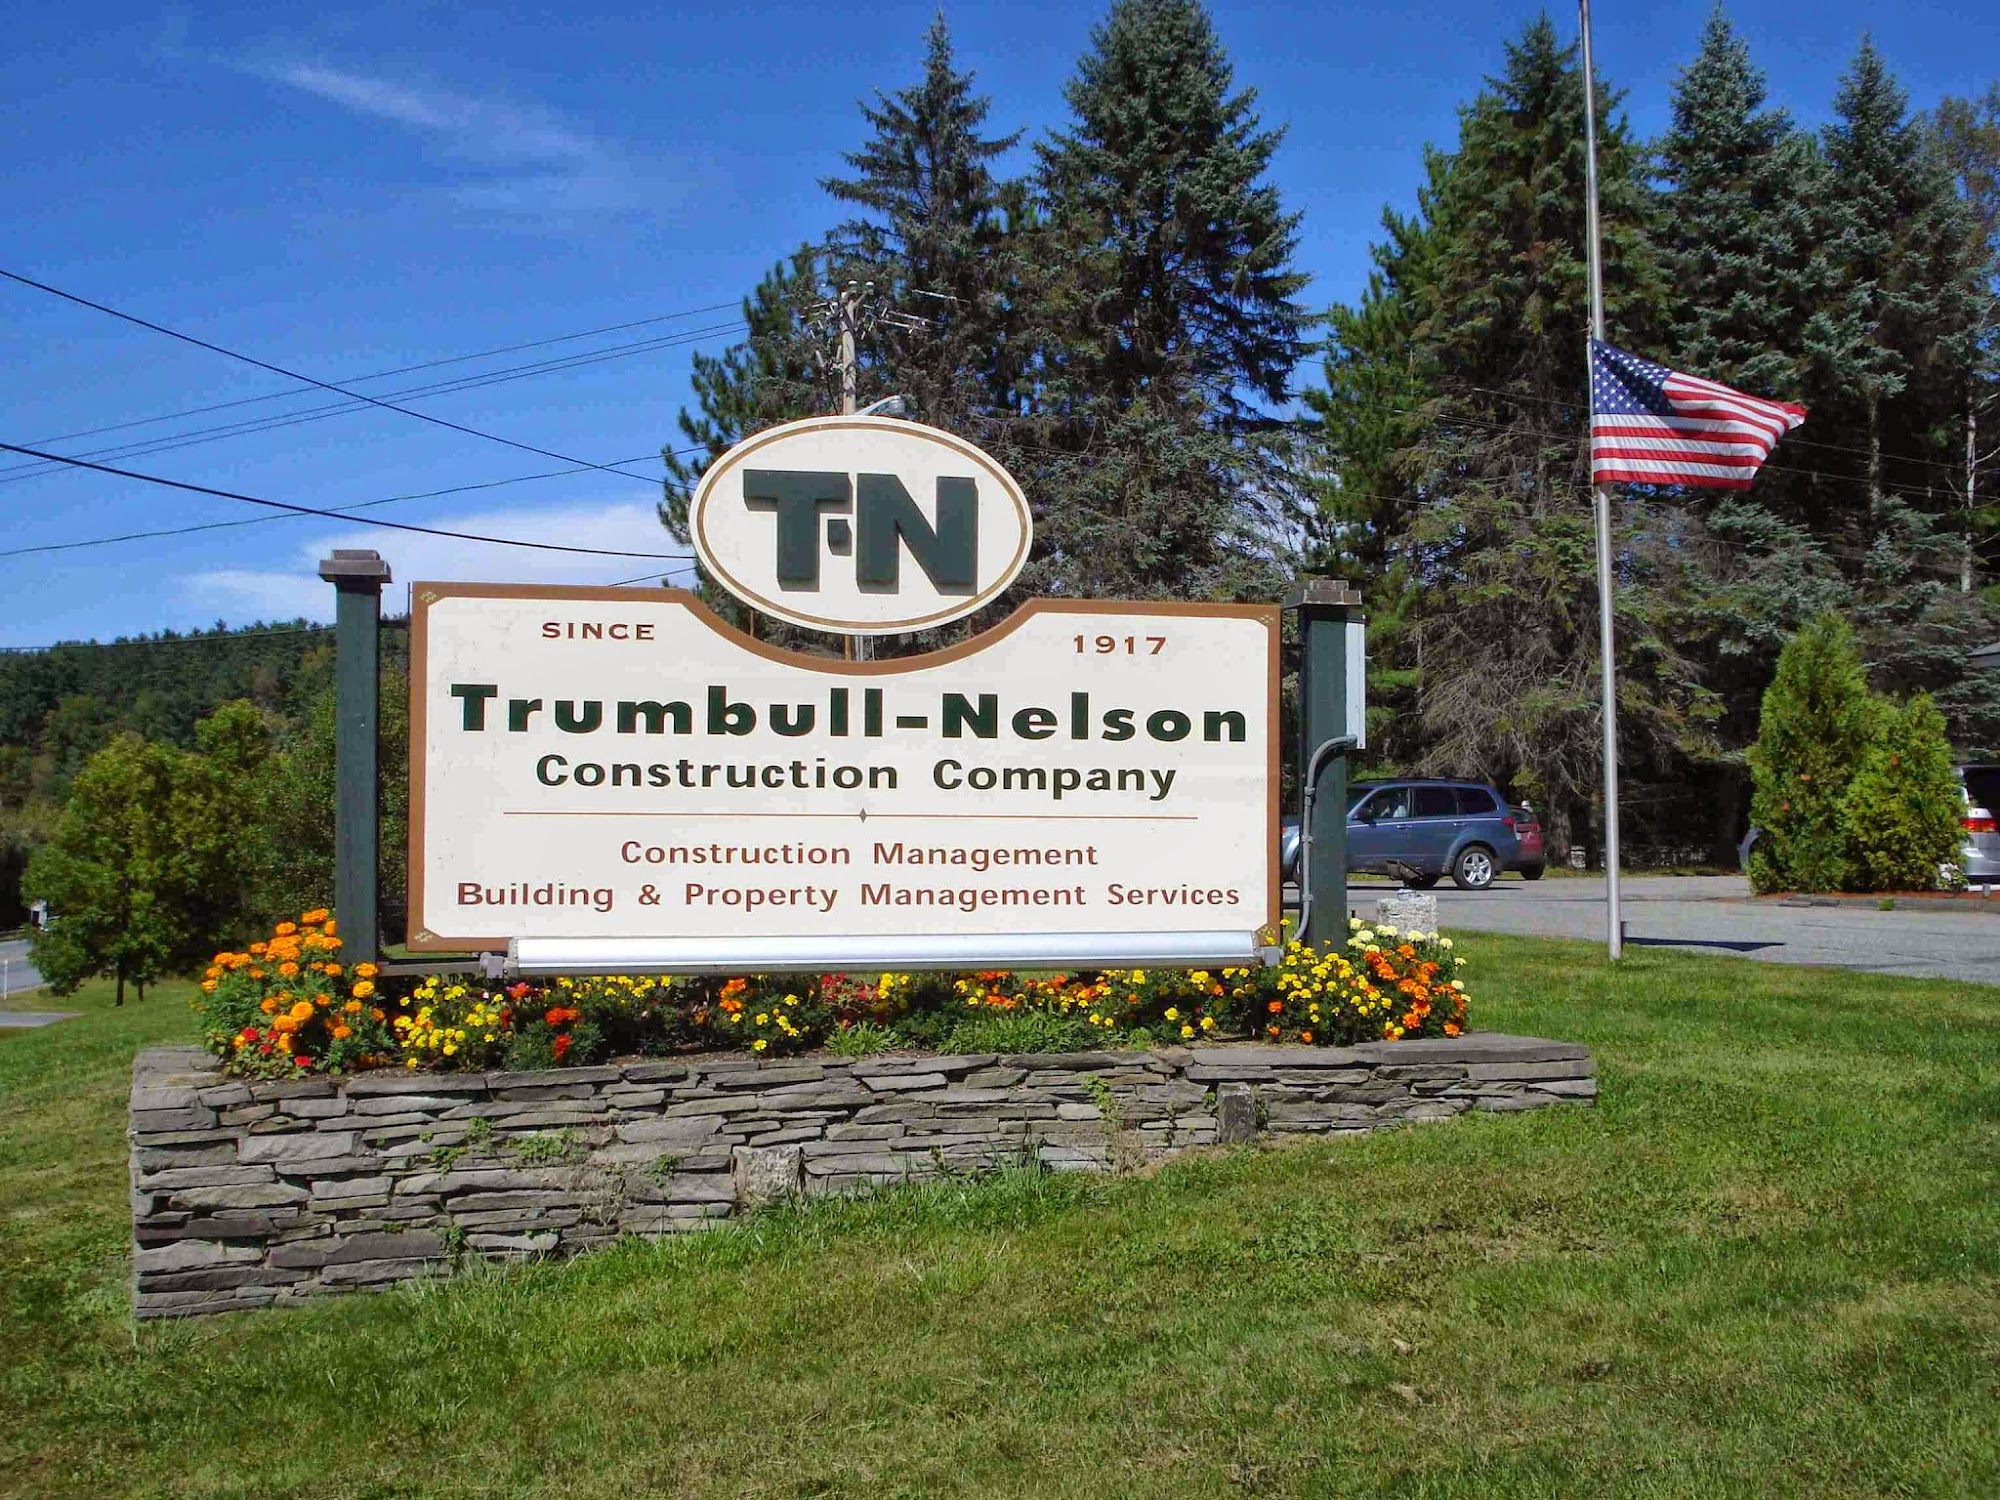 Trumbull-Nelson Construction Company, Inc. 19 Plaza Heights Rd, West Lebanon New Hampshire 03784